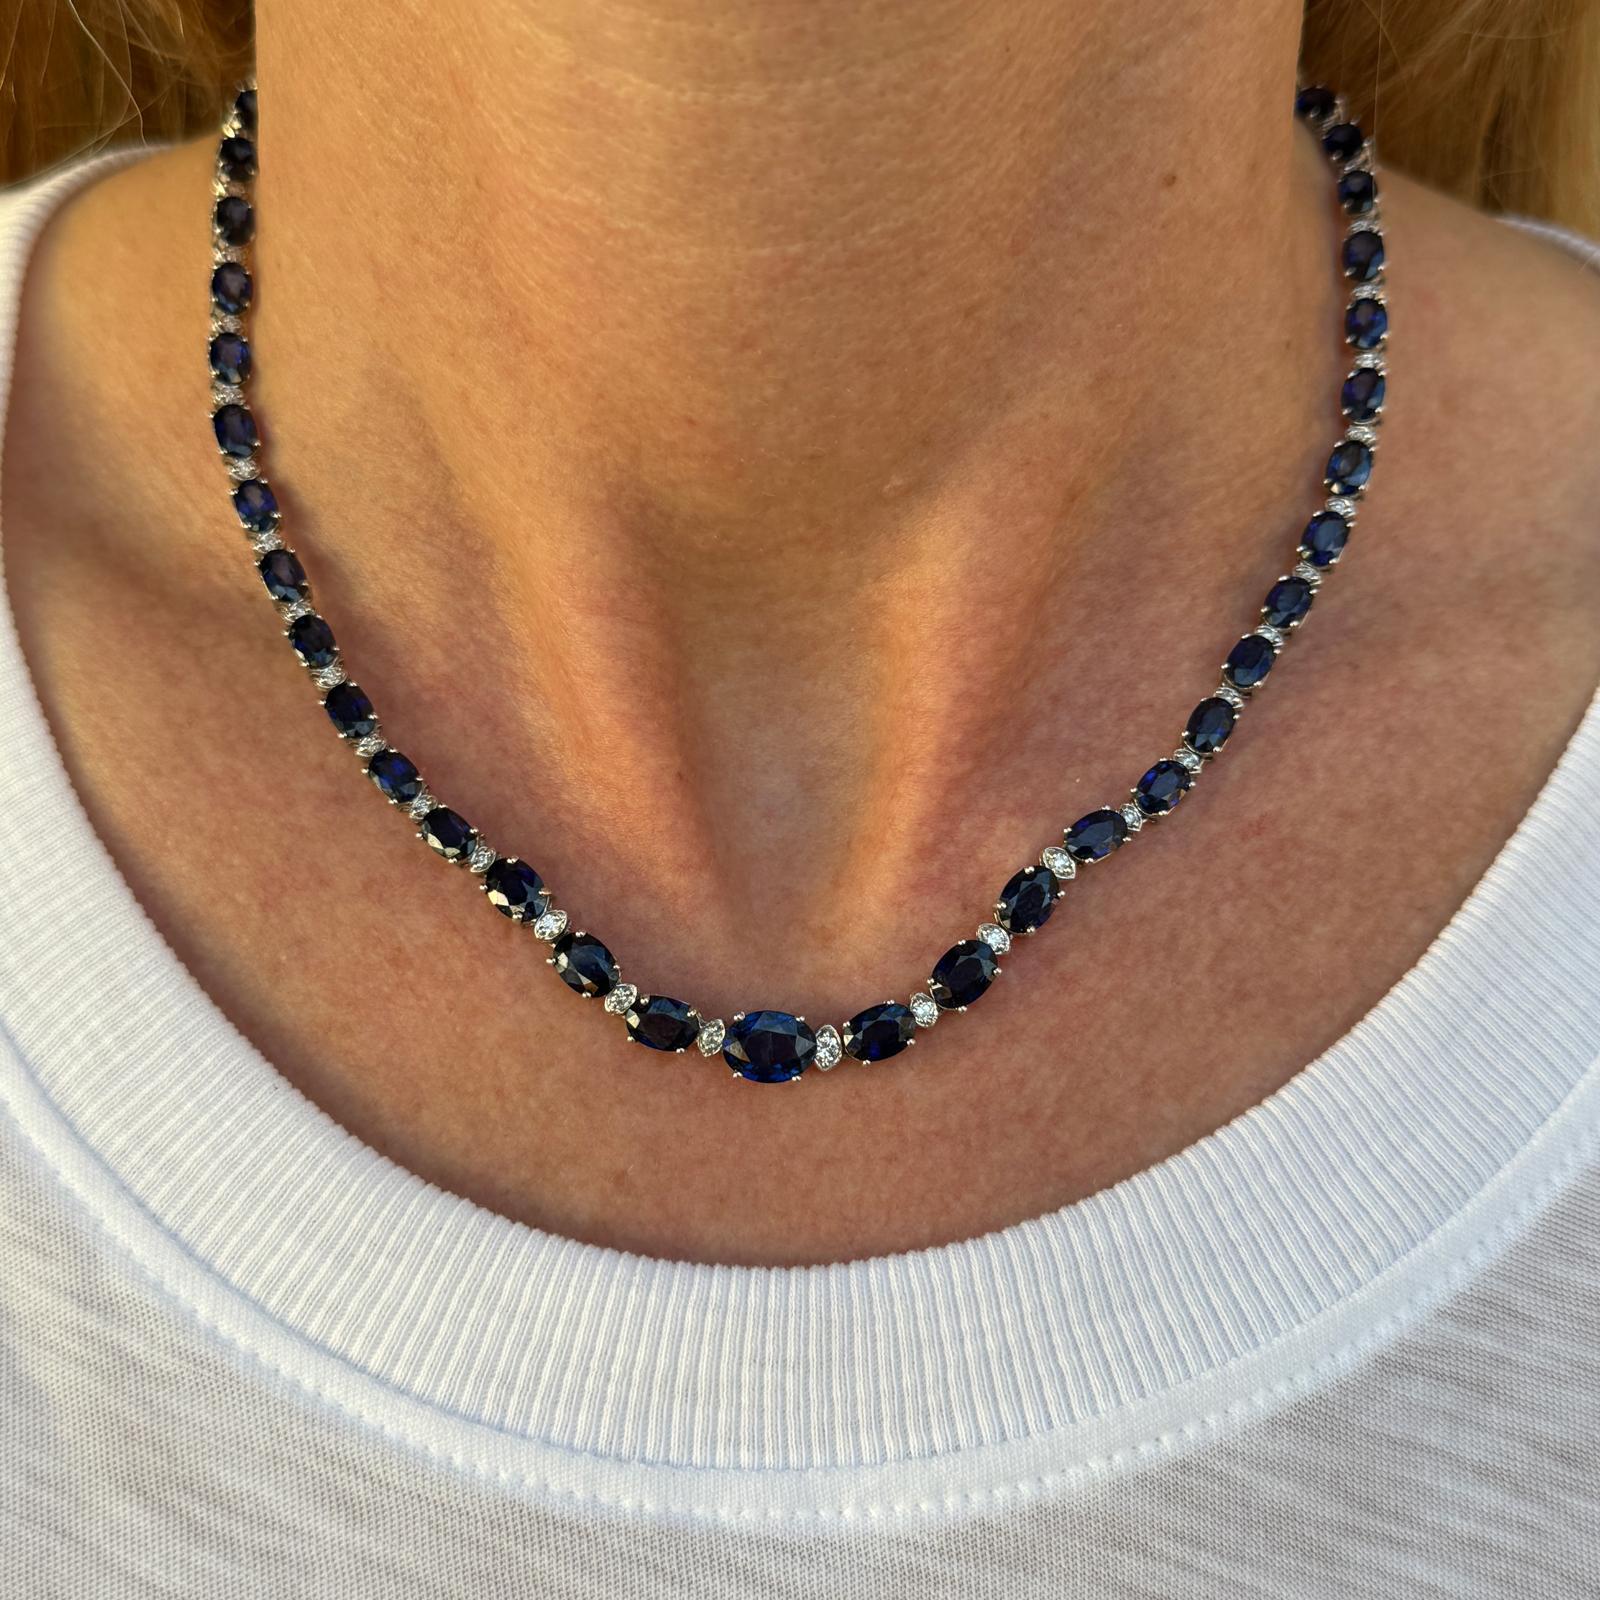 Modern oval sapphire and diamond necklace fashioned in 14 karat white gold. The necklace features 51 oval natural blue sapphires weighing approximately 30 carat total weight and 51 round brilliant cut diamonds weighing approximately 1.10 carat total